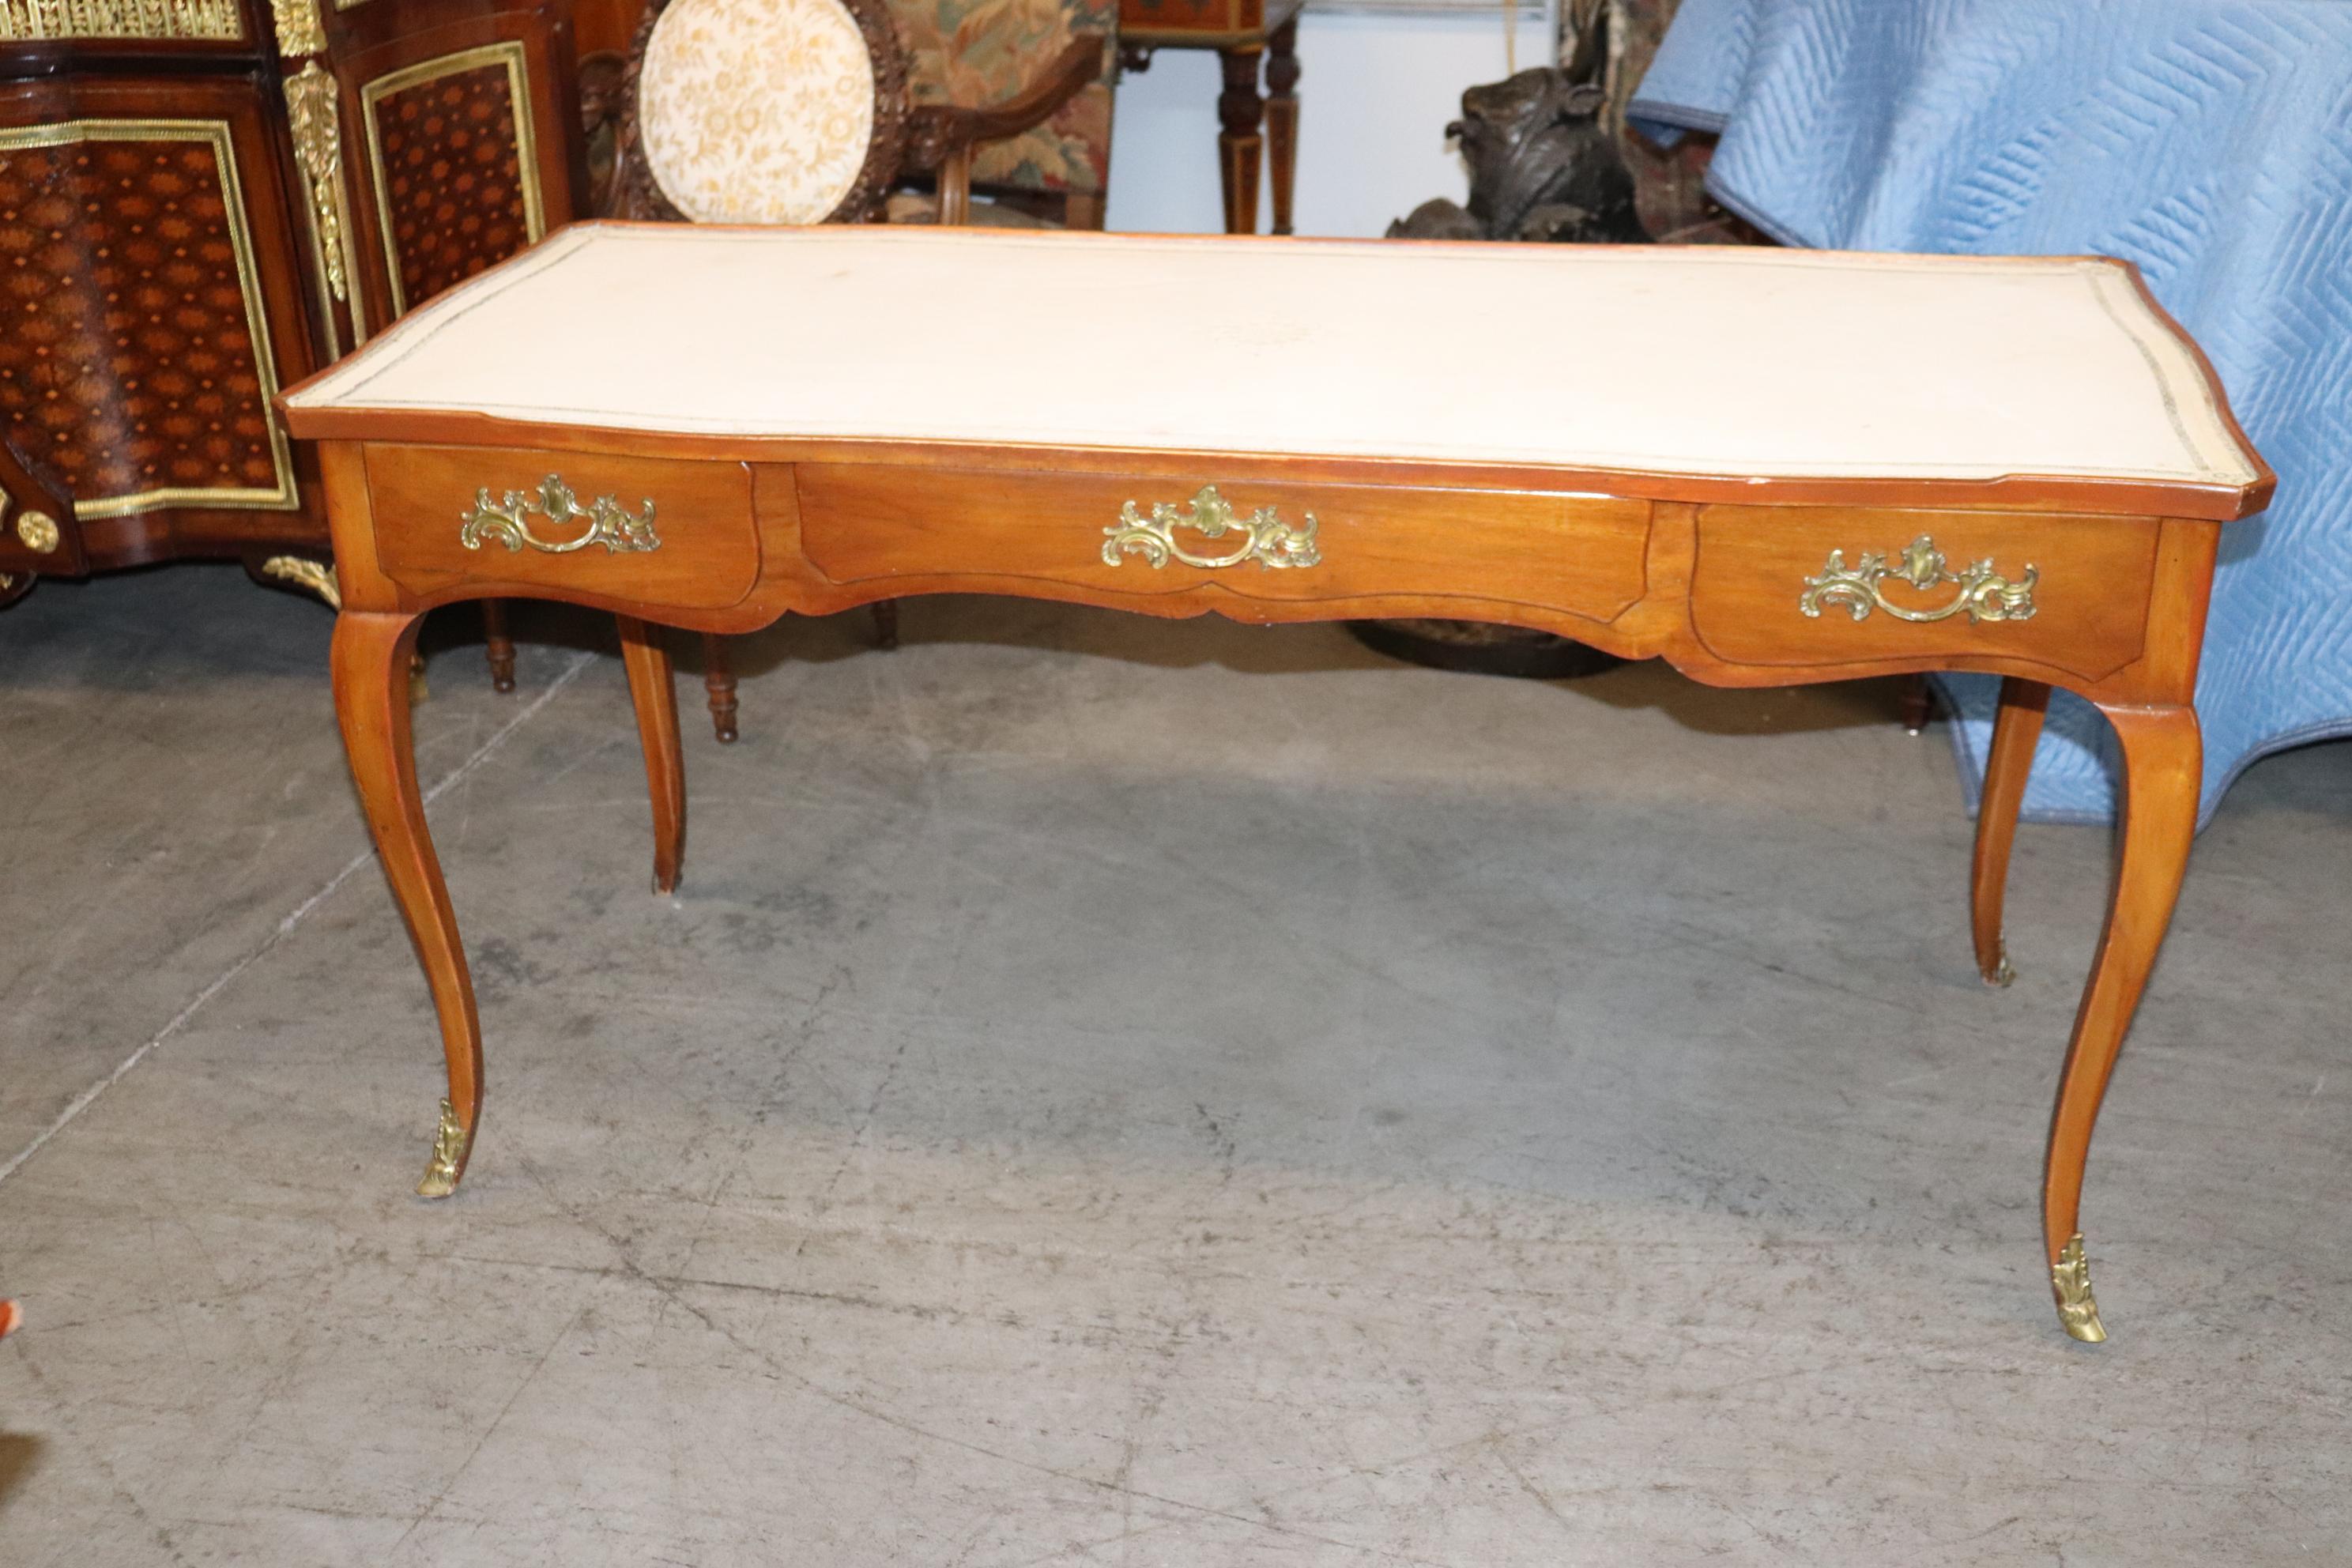 This is a fantastic Beacon Hill superb quality French Louis XV style writing desk. The desk is in very good used condition and has a gorgeous white embossed leather top and features beautiful bronze ormolu too. The desk a complete set of working